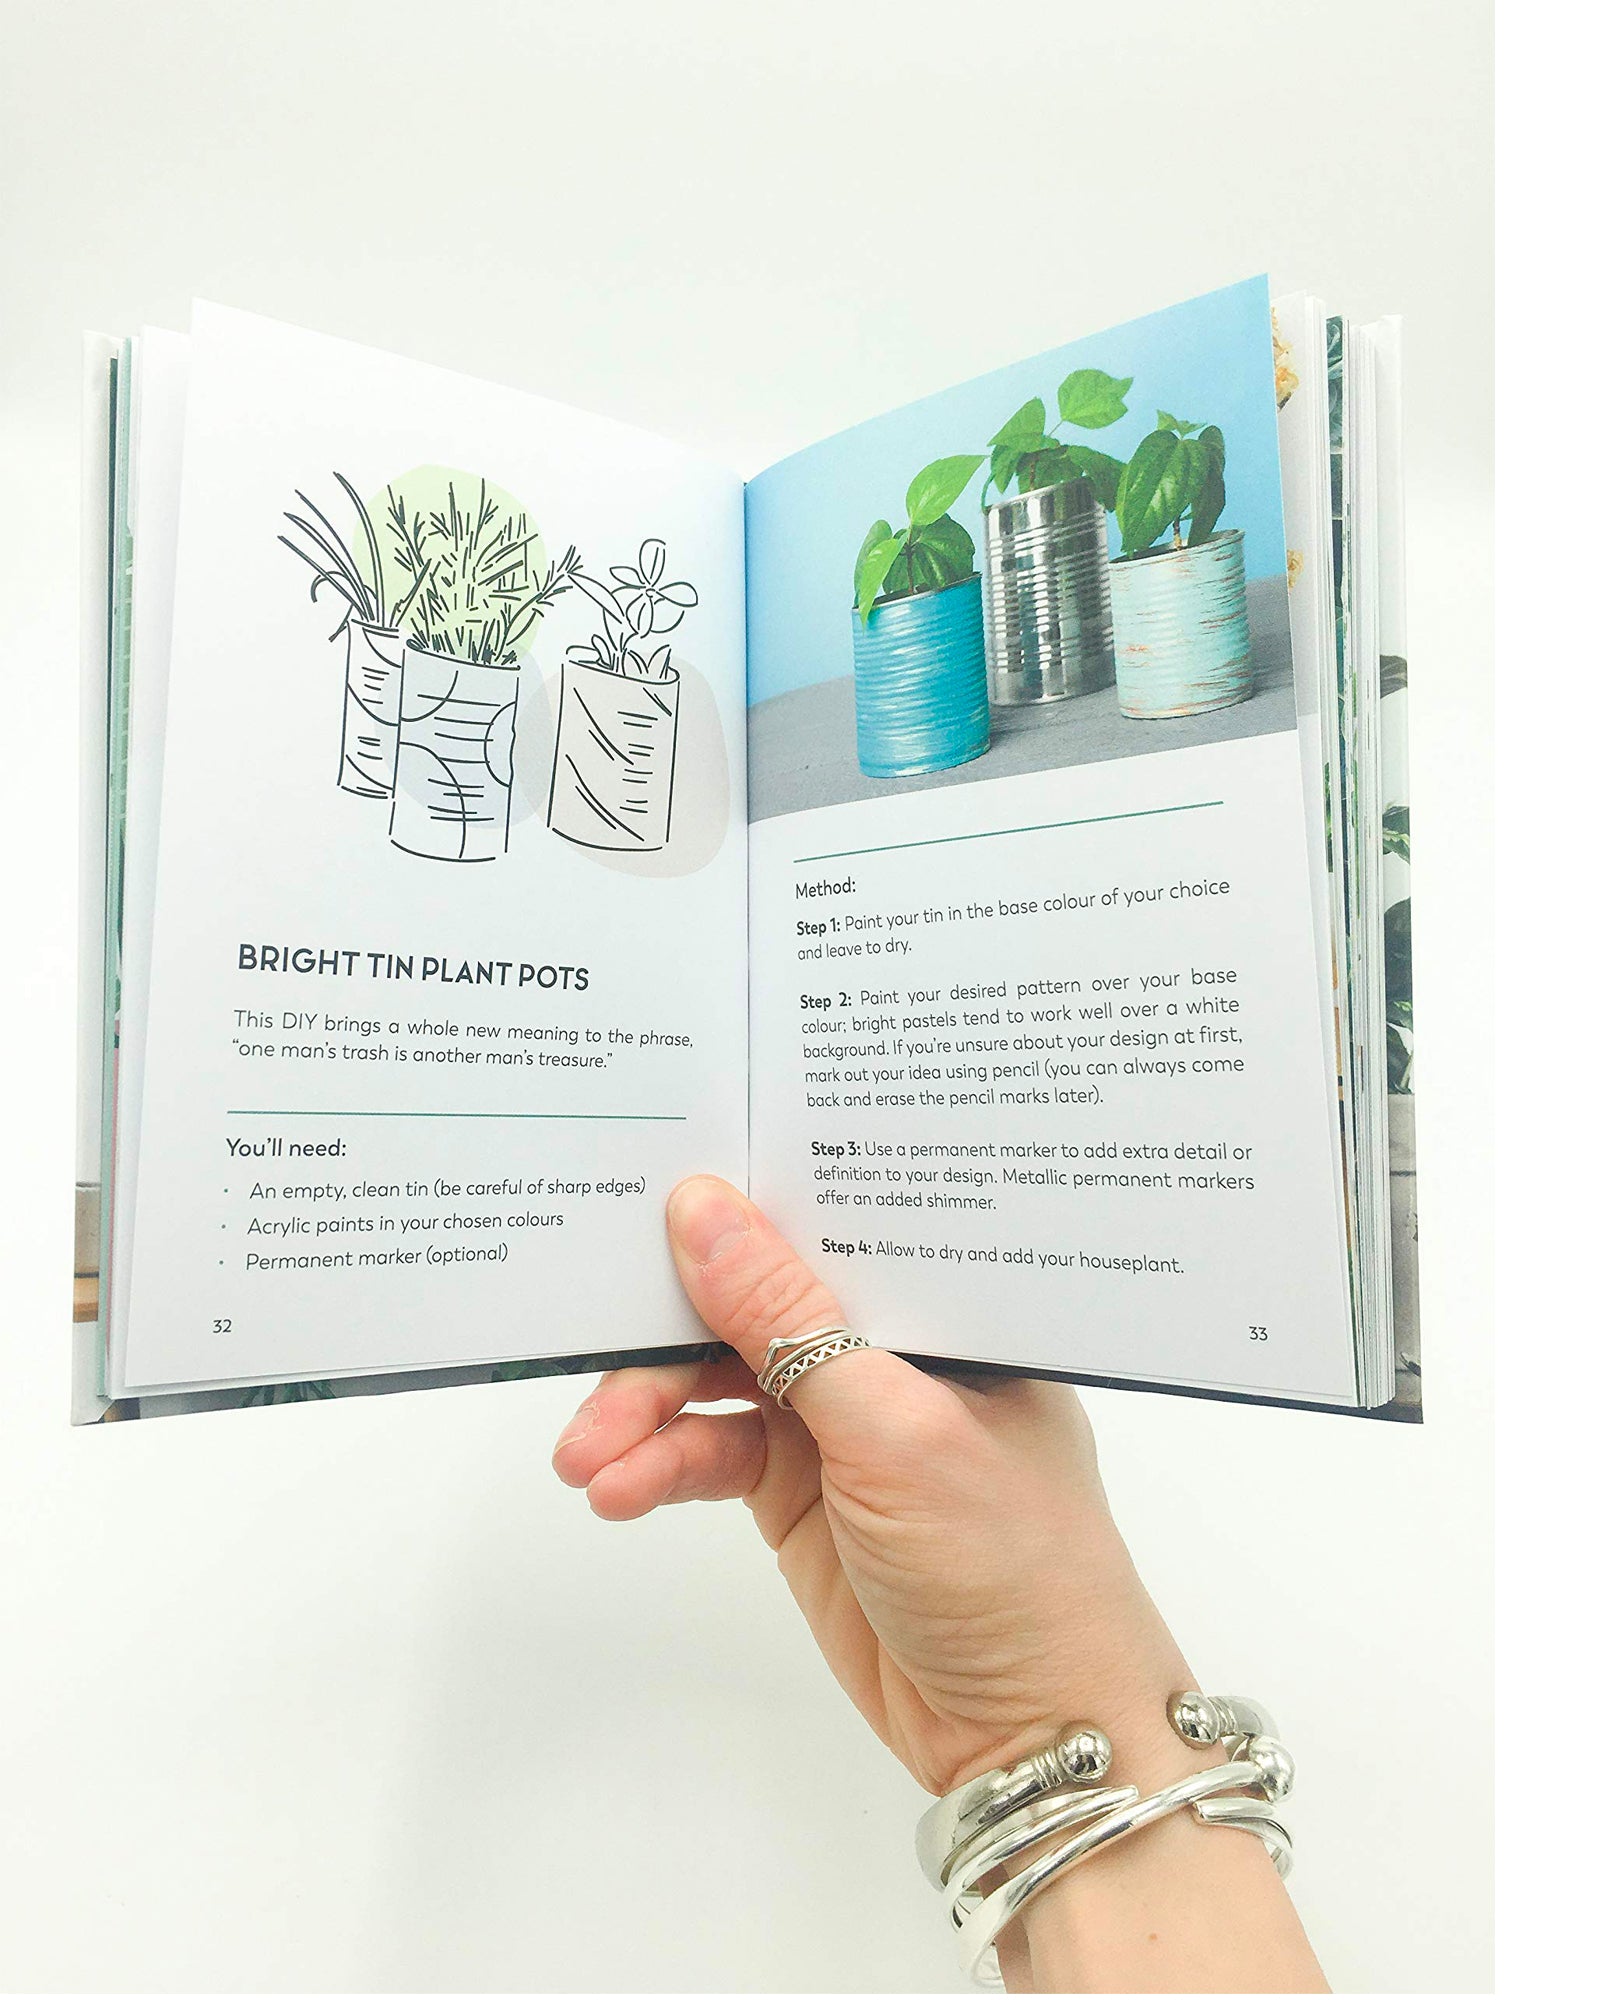 THE LITTLE BOOK FOR PLANT PARENTS - BOOK